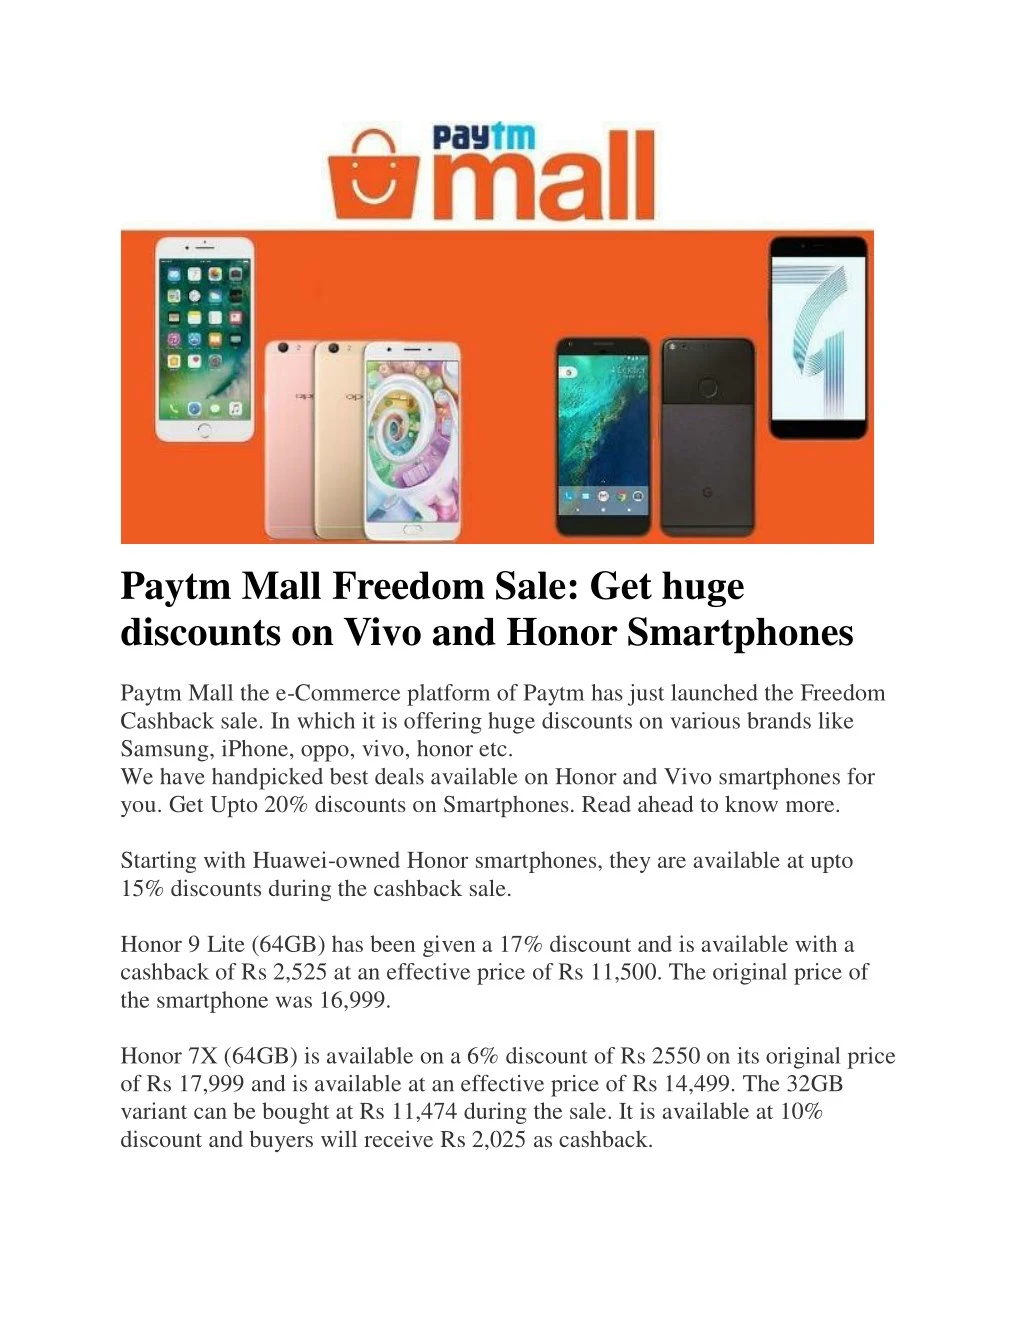 paytm mall freedom sale get huge discounts